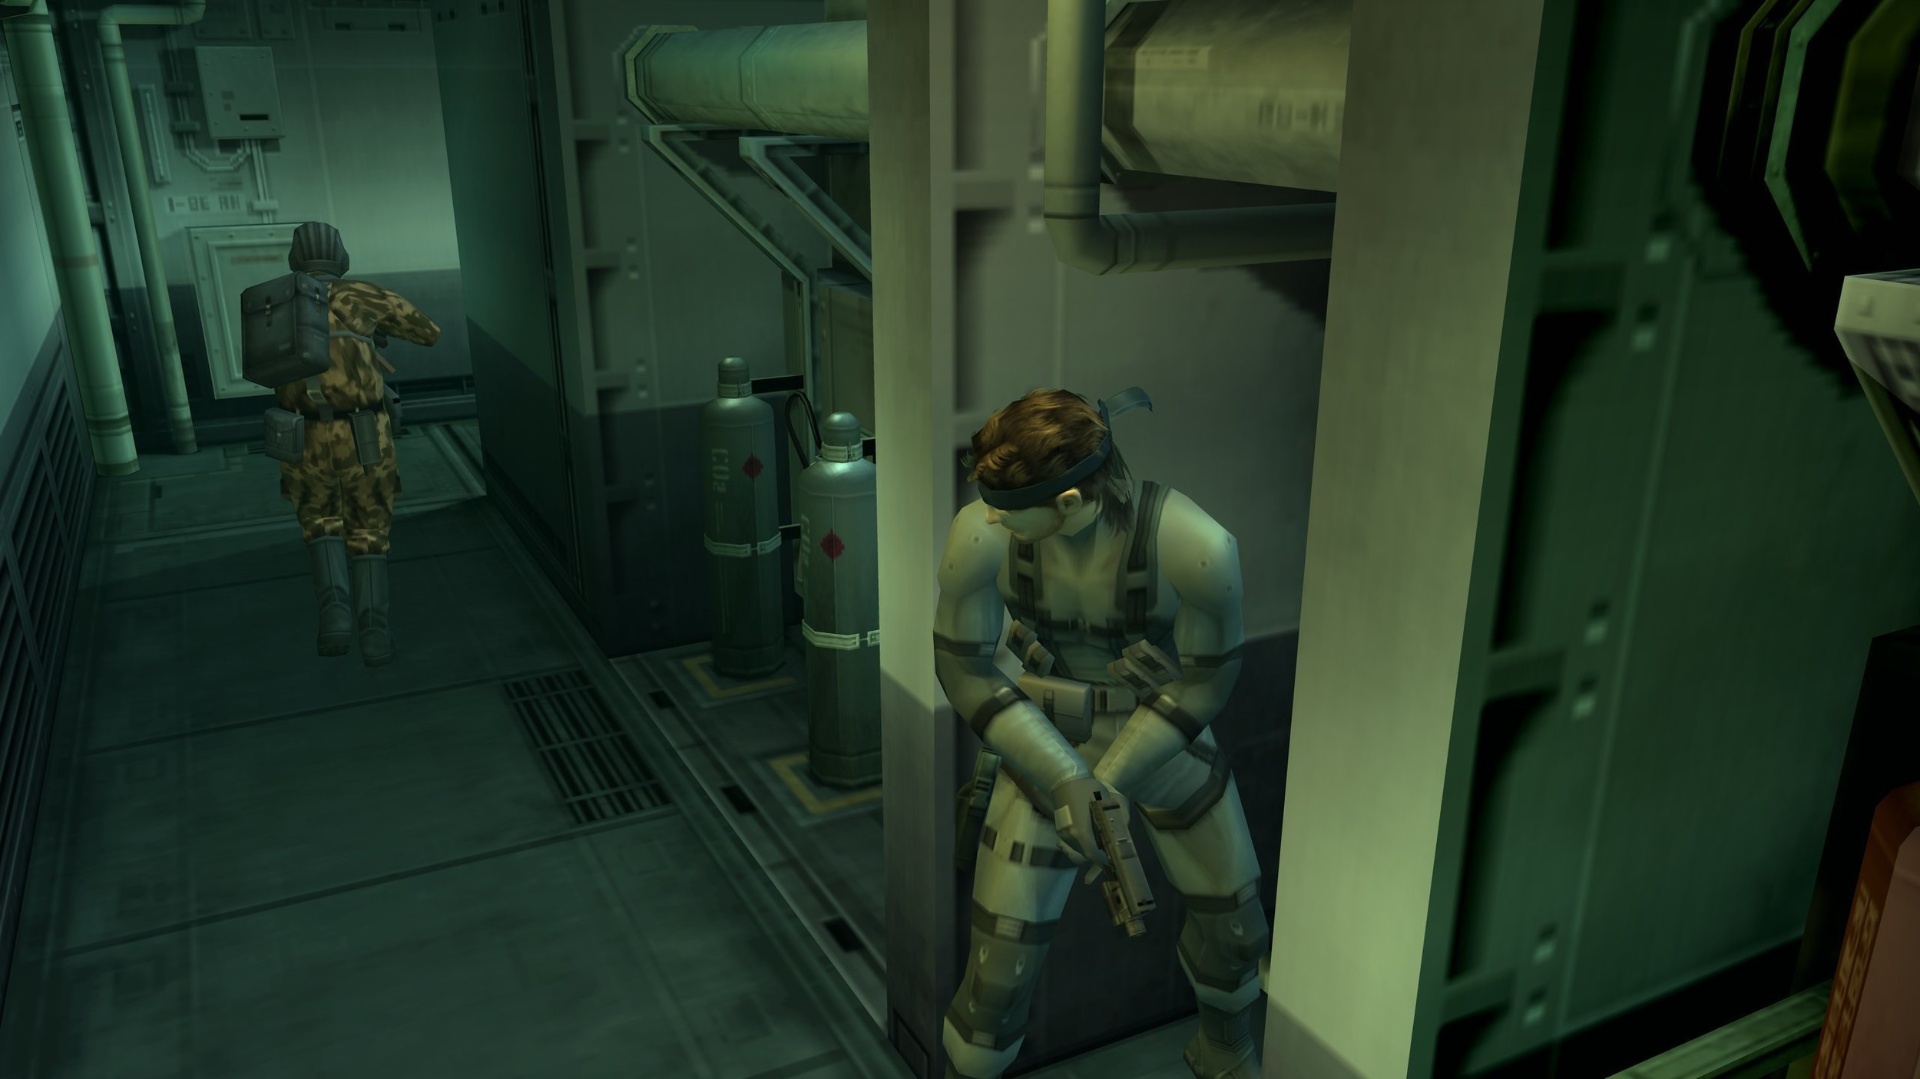 Metal Gear Solid – What Players Need To Know About The Game Series